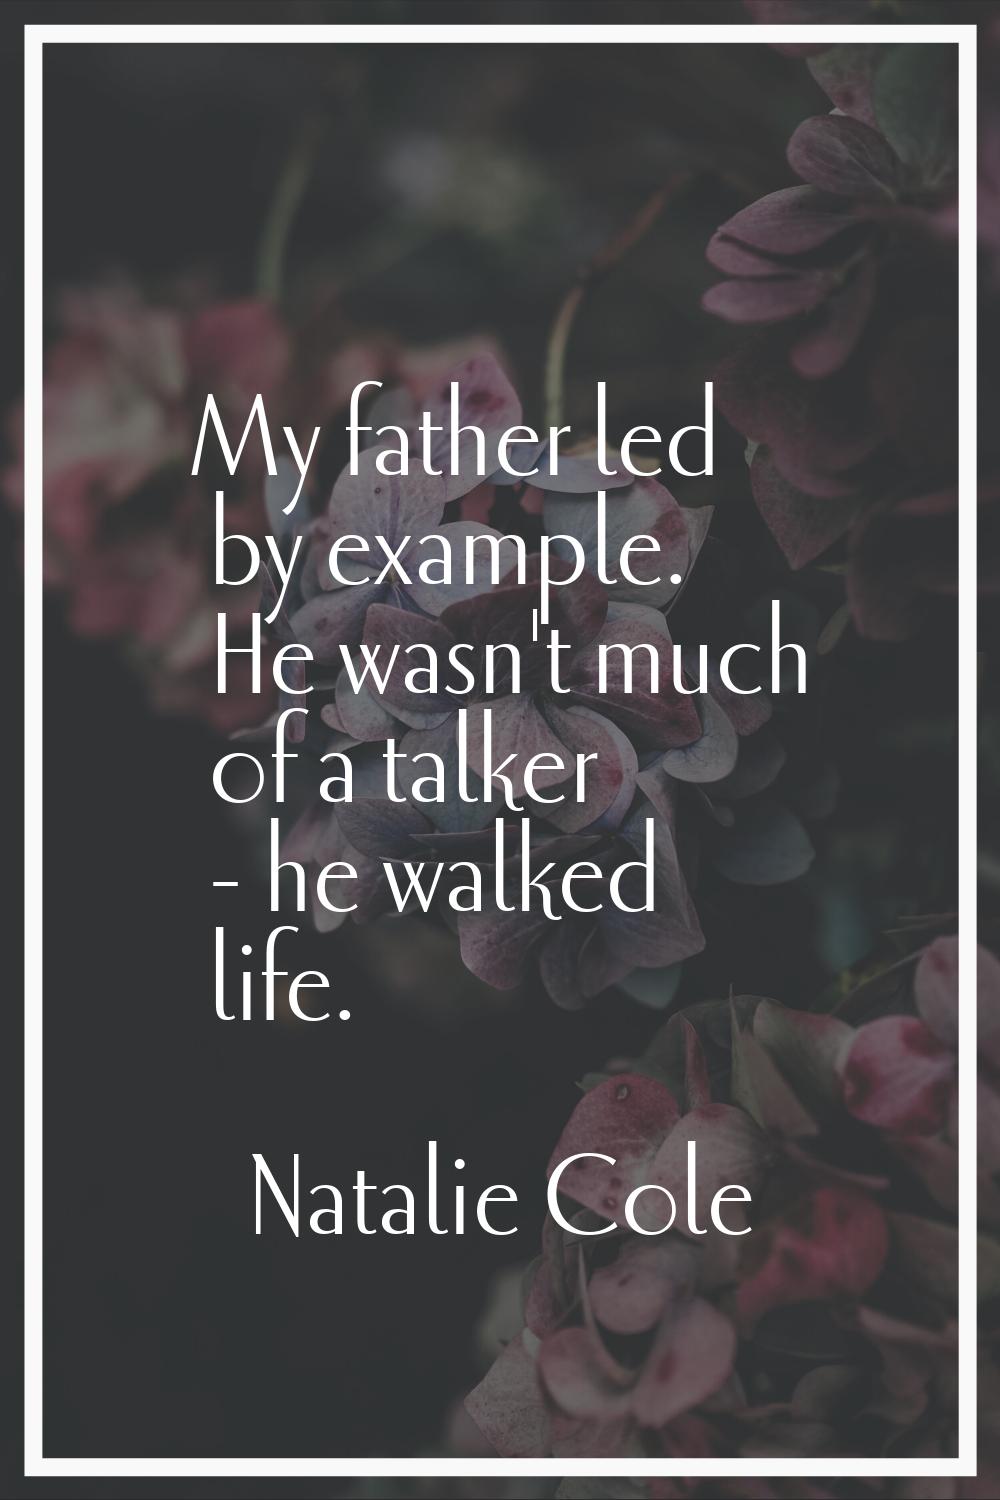 My father led by example. He wasn't much of a talker - he walked life.